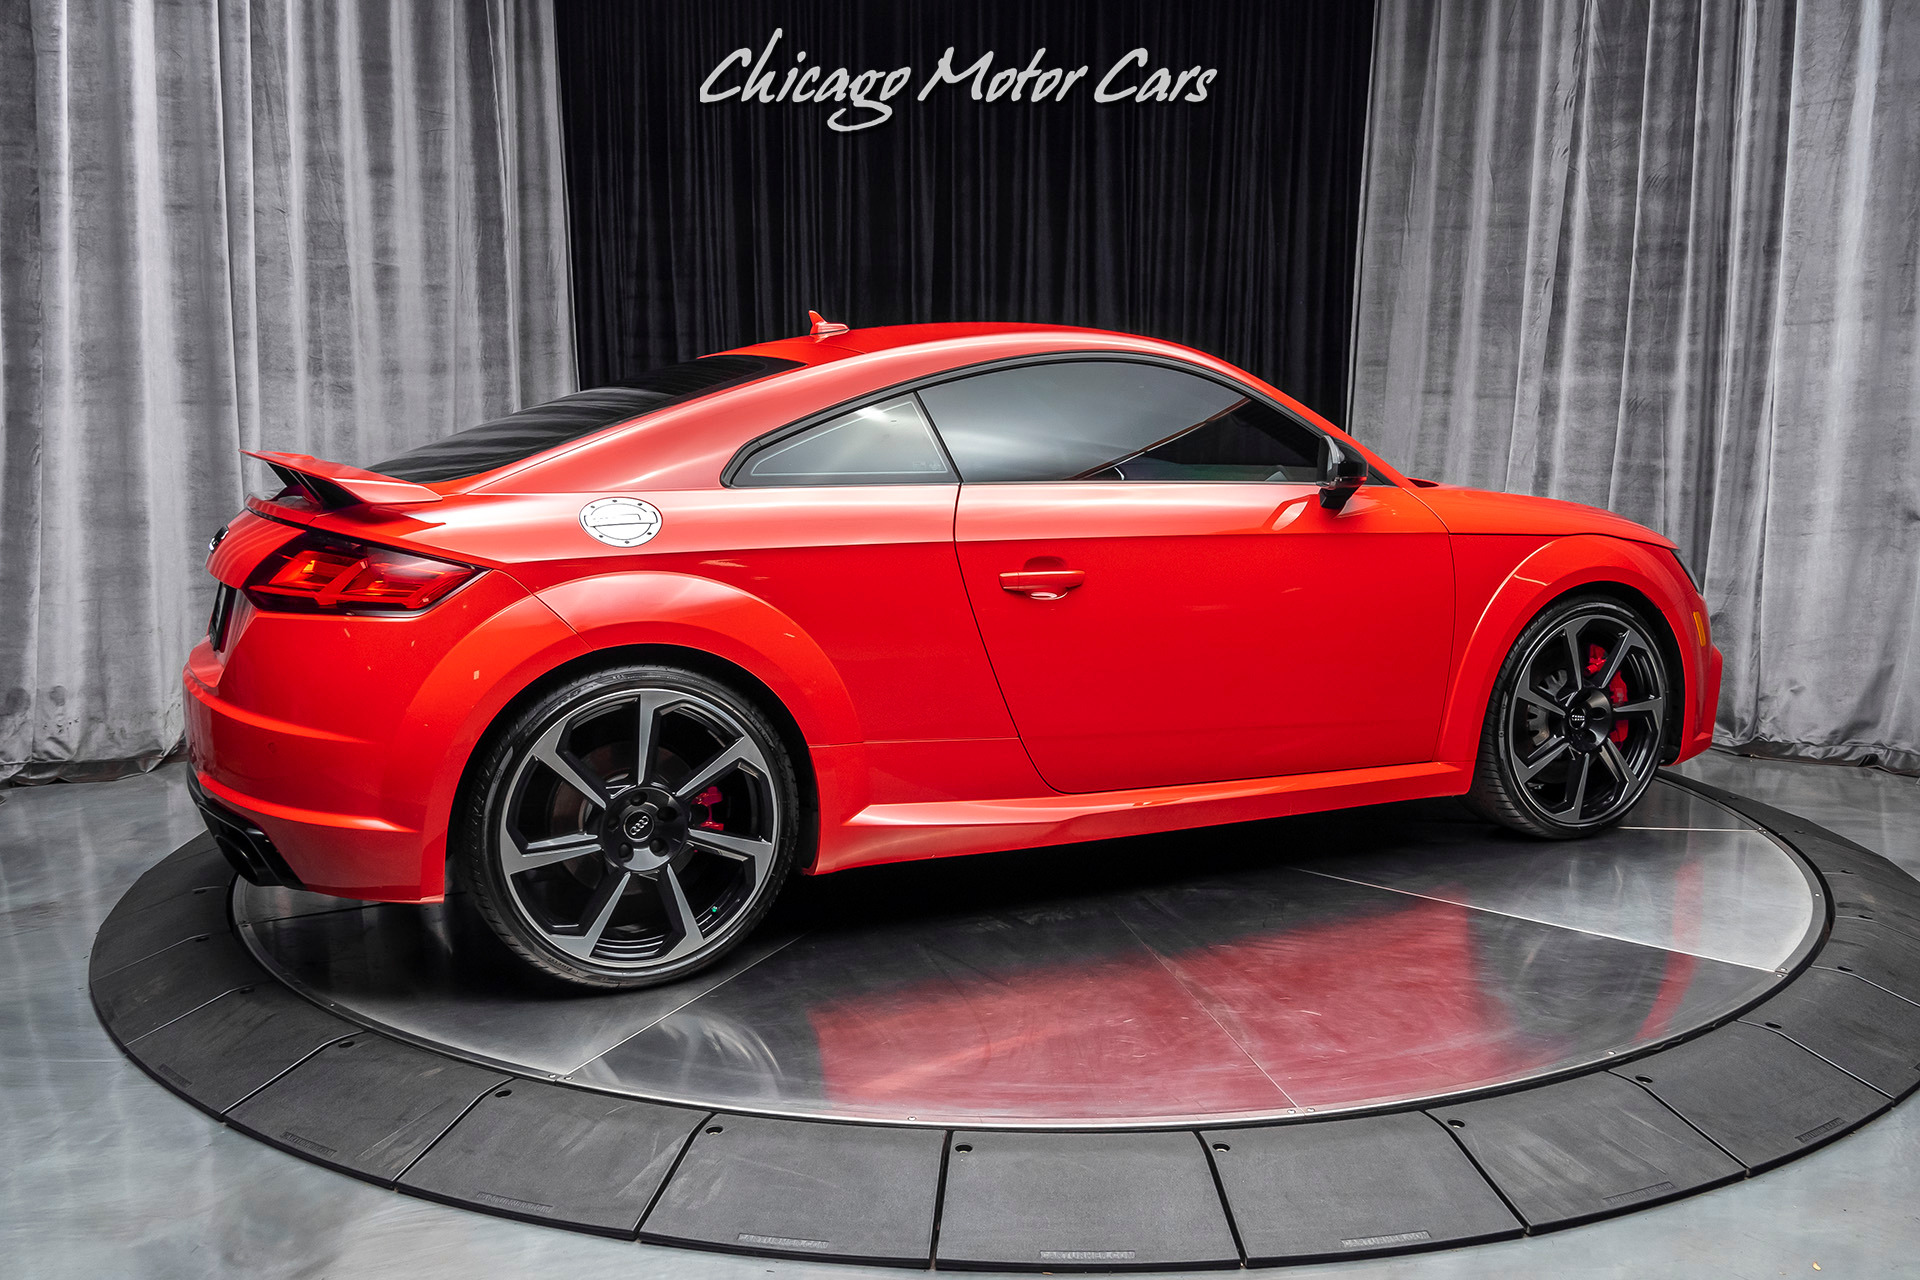 Used 2018 Audi TT RS 2.5T Original MSRP $74k+ TECHNOLOGY PKG! BLACK OPTIC PACKAGE! For Sale (Special Pricing) Chicago Motor Cars Stock #17043A